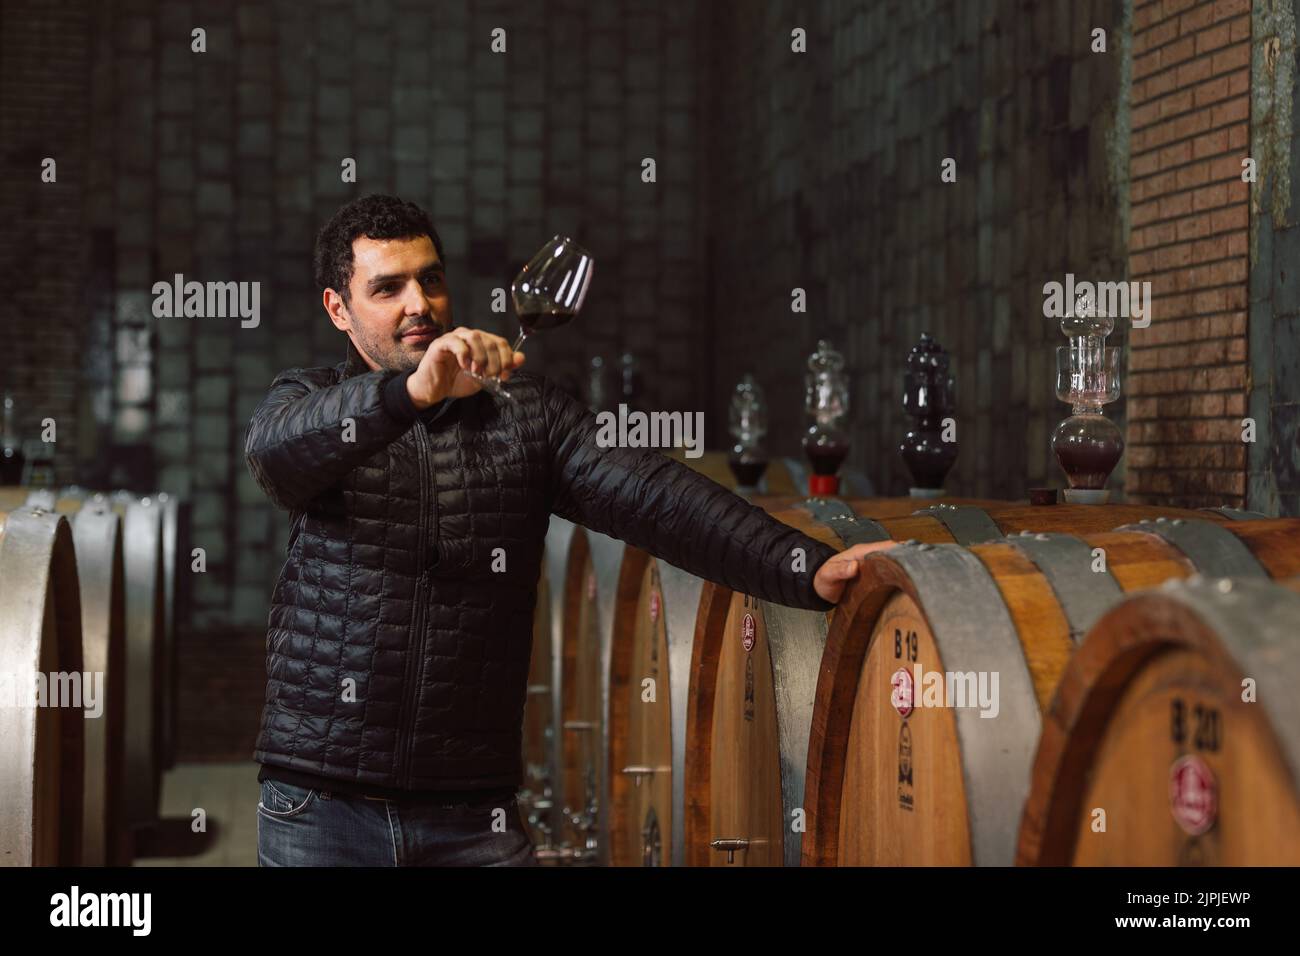 Man tasting red wine in a winery barrel cellar, holding a wine glass, swirling it, smelling, and sipping wine, delighted with wine taste and flavor. Stock Photo